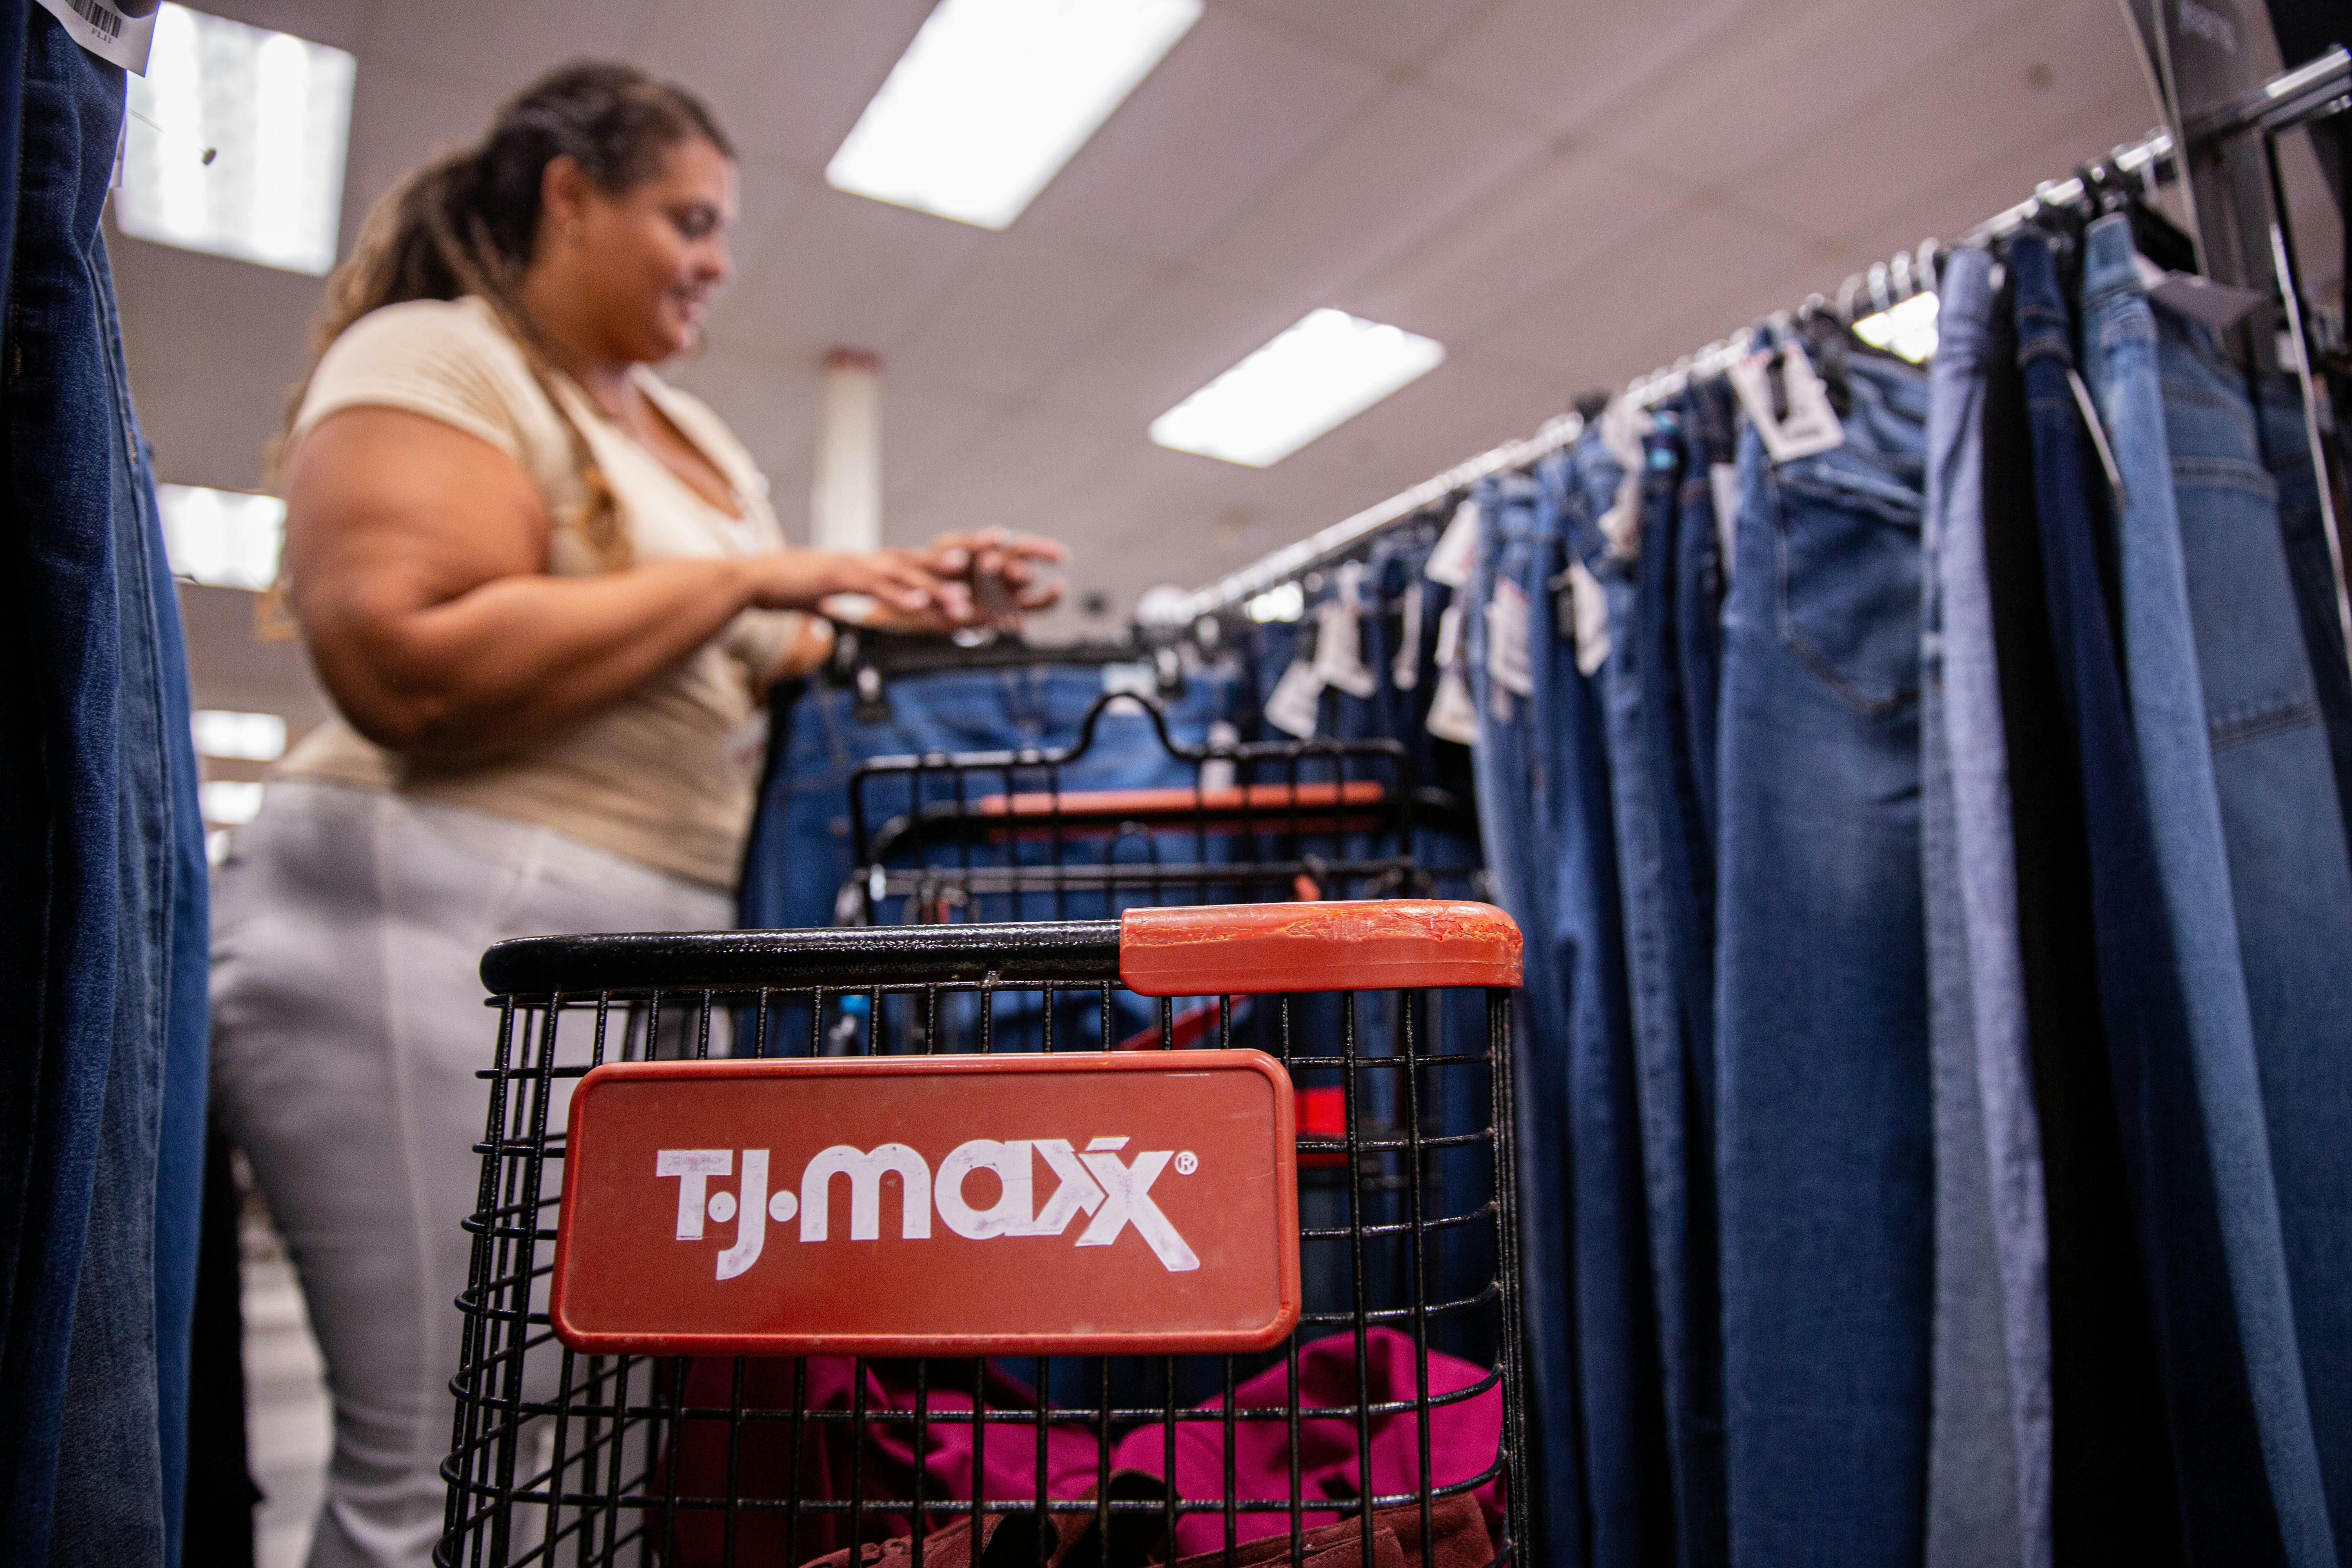 TJ Maxx and Ross Stores Compared, Pictures, Details